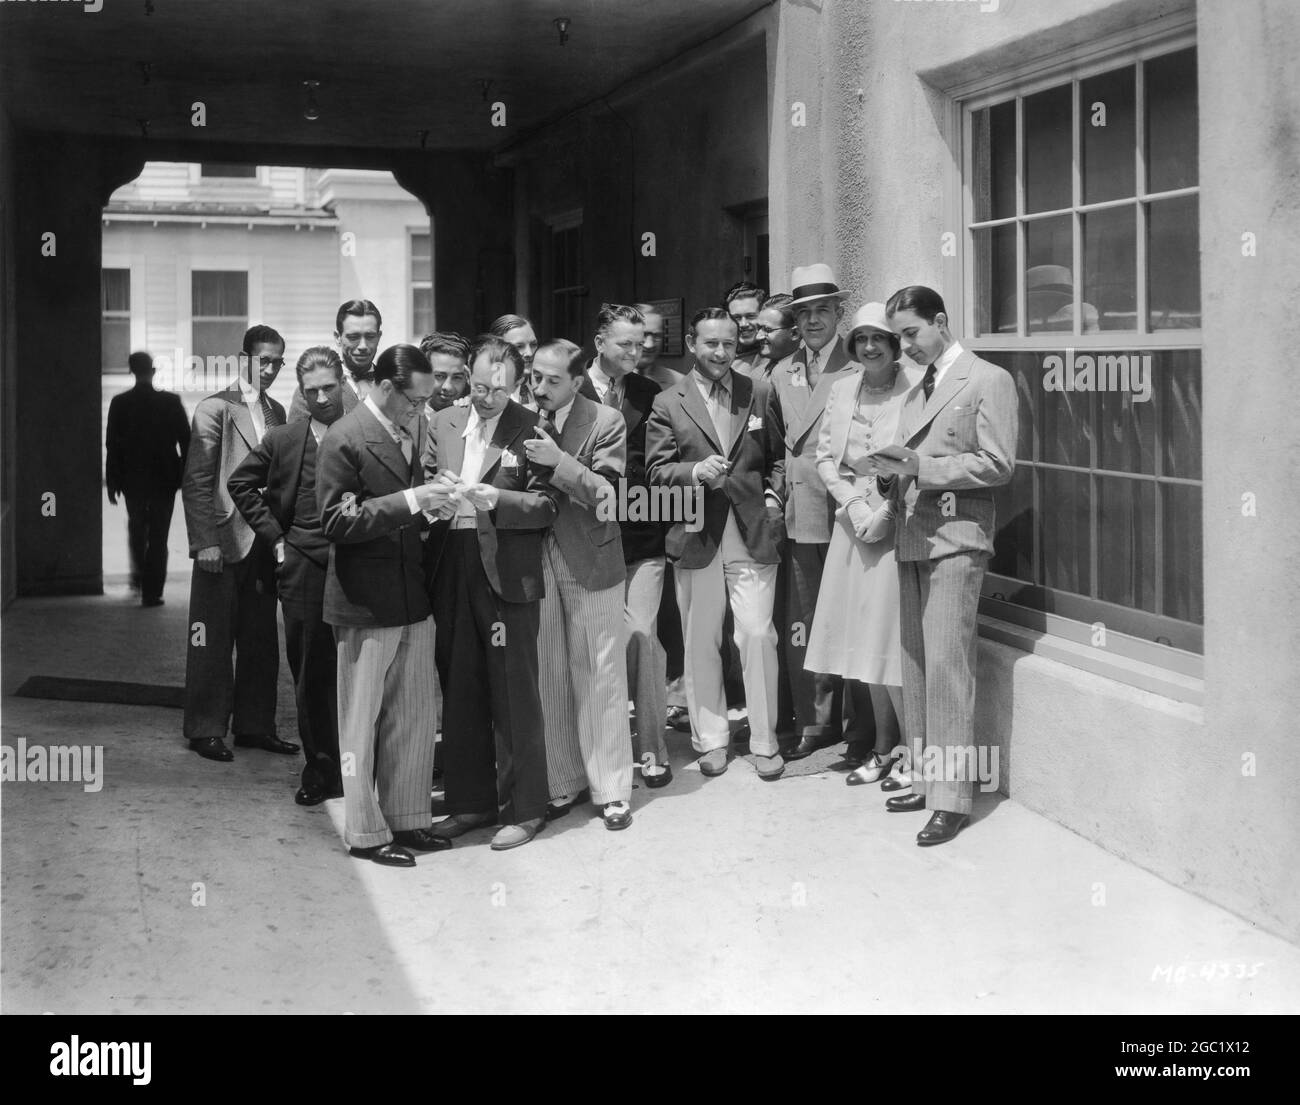 Music and Lyric Writers Musicians and Arrangers under contract to MGM Studios in 1930 studio lot candid with from left to right front : JOSEPH MEYER ARTHUR LANGE (Head of Music Department) ERNEST KLAPHOLZ ARTHUR FREED JIMMY McHUGH DOROTHY FIELDS and MARTIN BROONES. Back row : SAM FEINBERG CHARLES DRURY HARRY M. WOODS RAY HEINDORF GEORGE WARD HOWARD JOHNSON CLIFFORD GREY REGGIE MONTGOMERY and CHARLES MAXWELL publicity for Metro Goldwyn Mayer Stock Photo